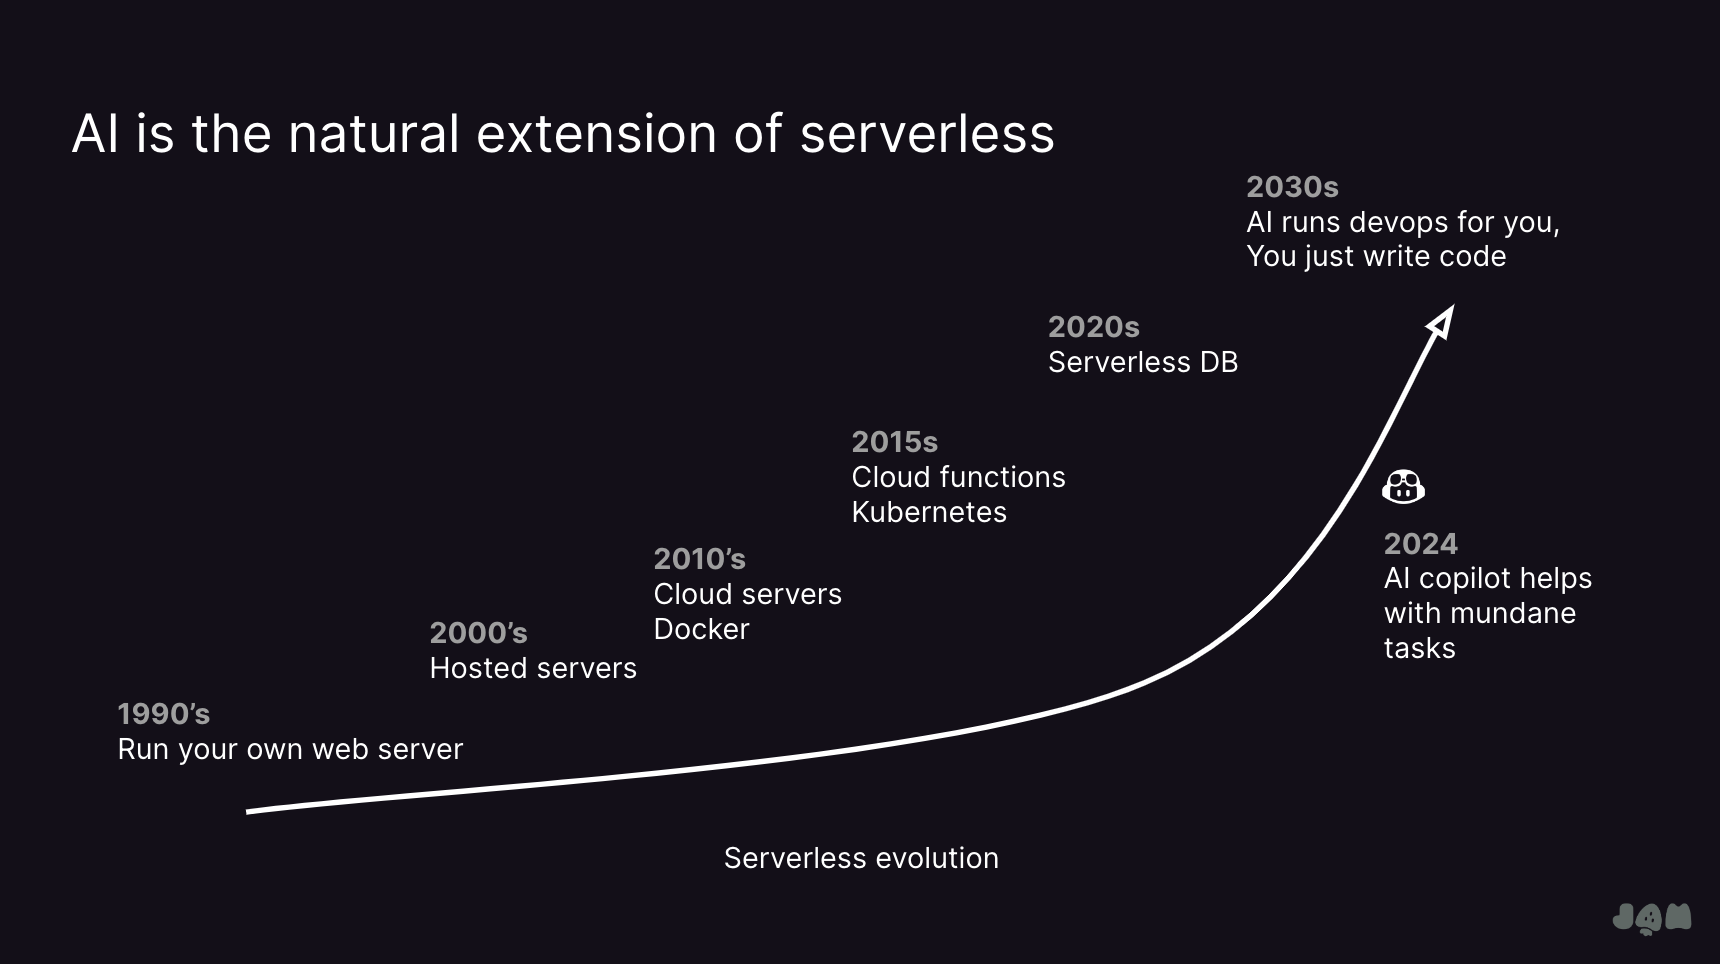 AI is the natural extension of serverless computing